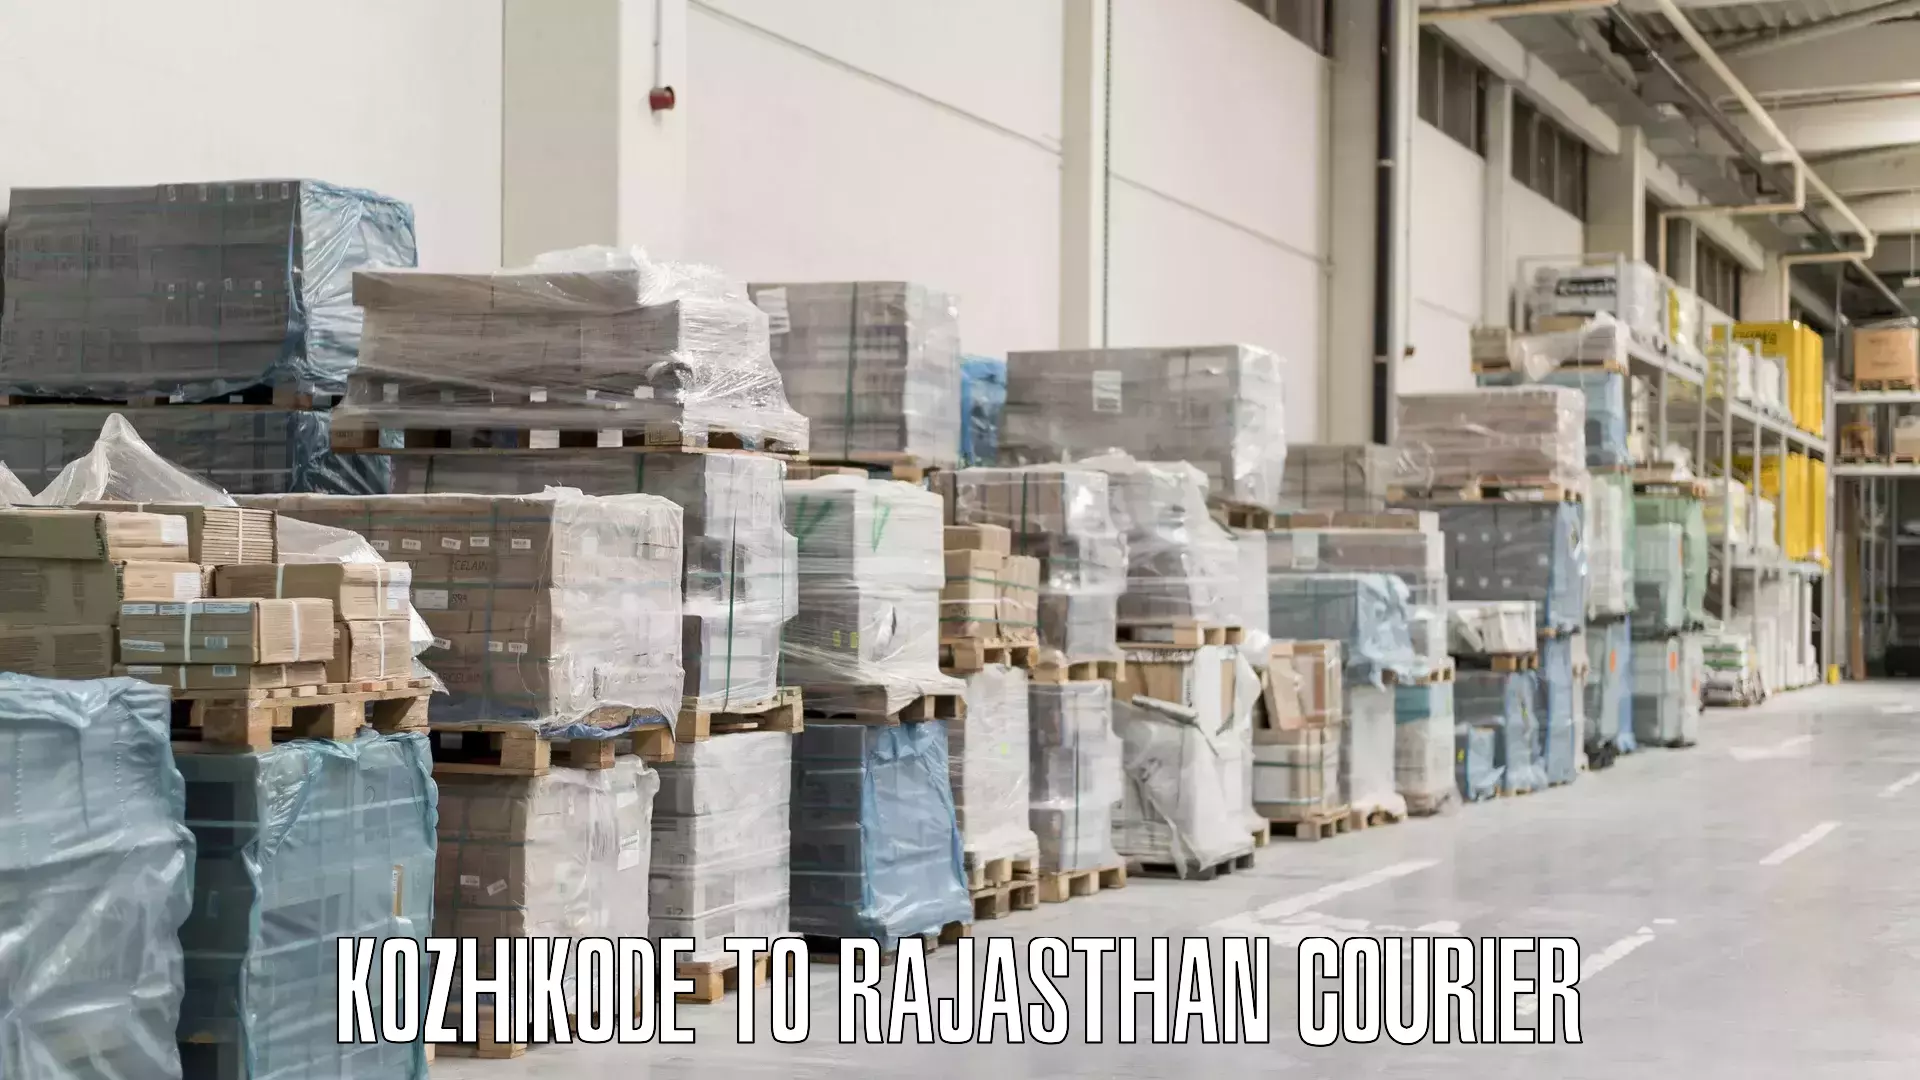 Luggage shipment specialists Kozhikode to Rajasthan